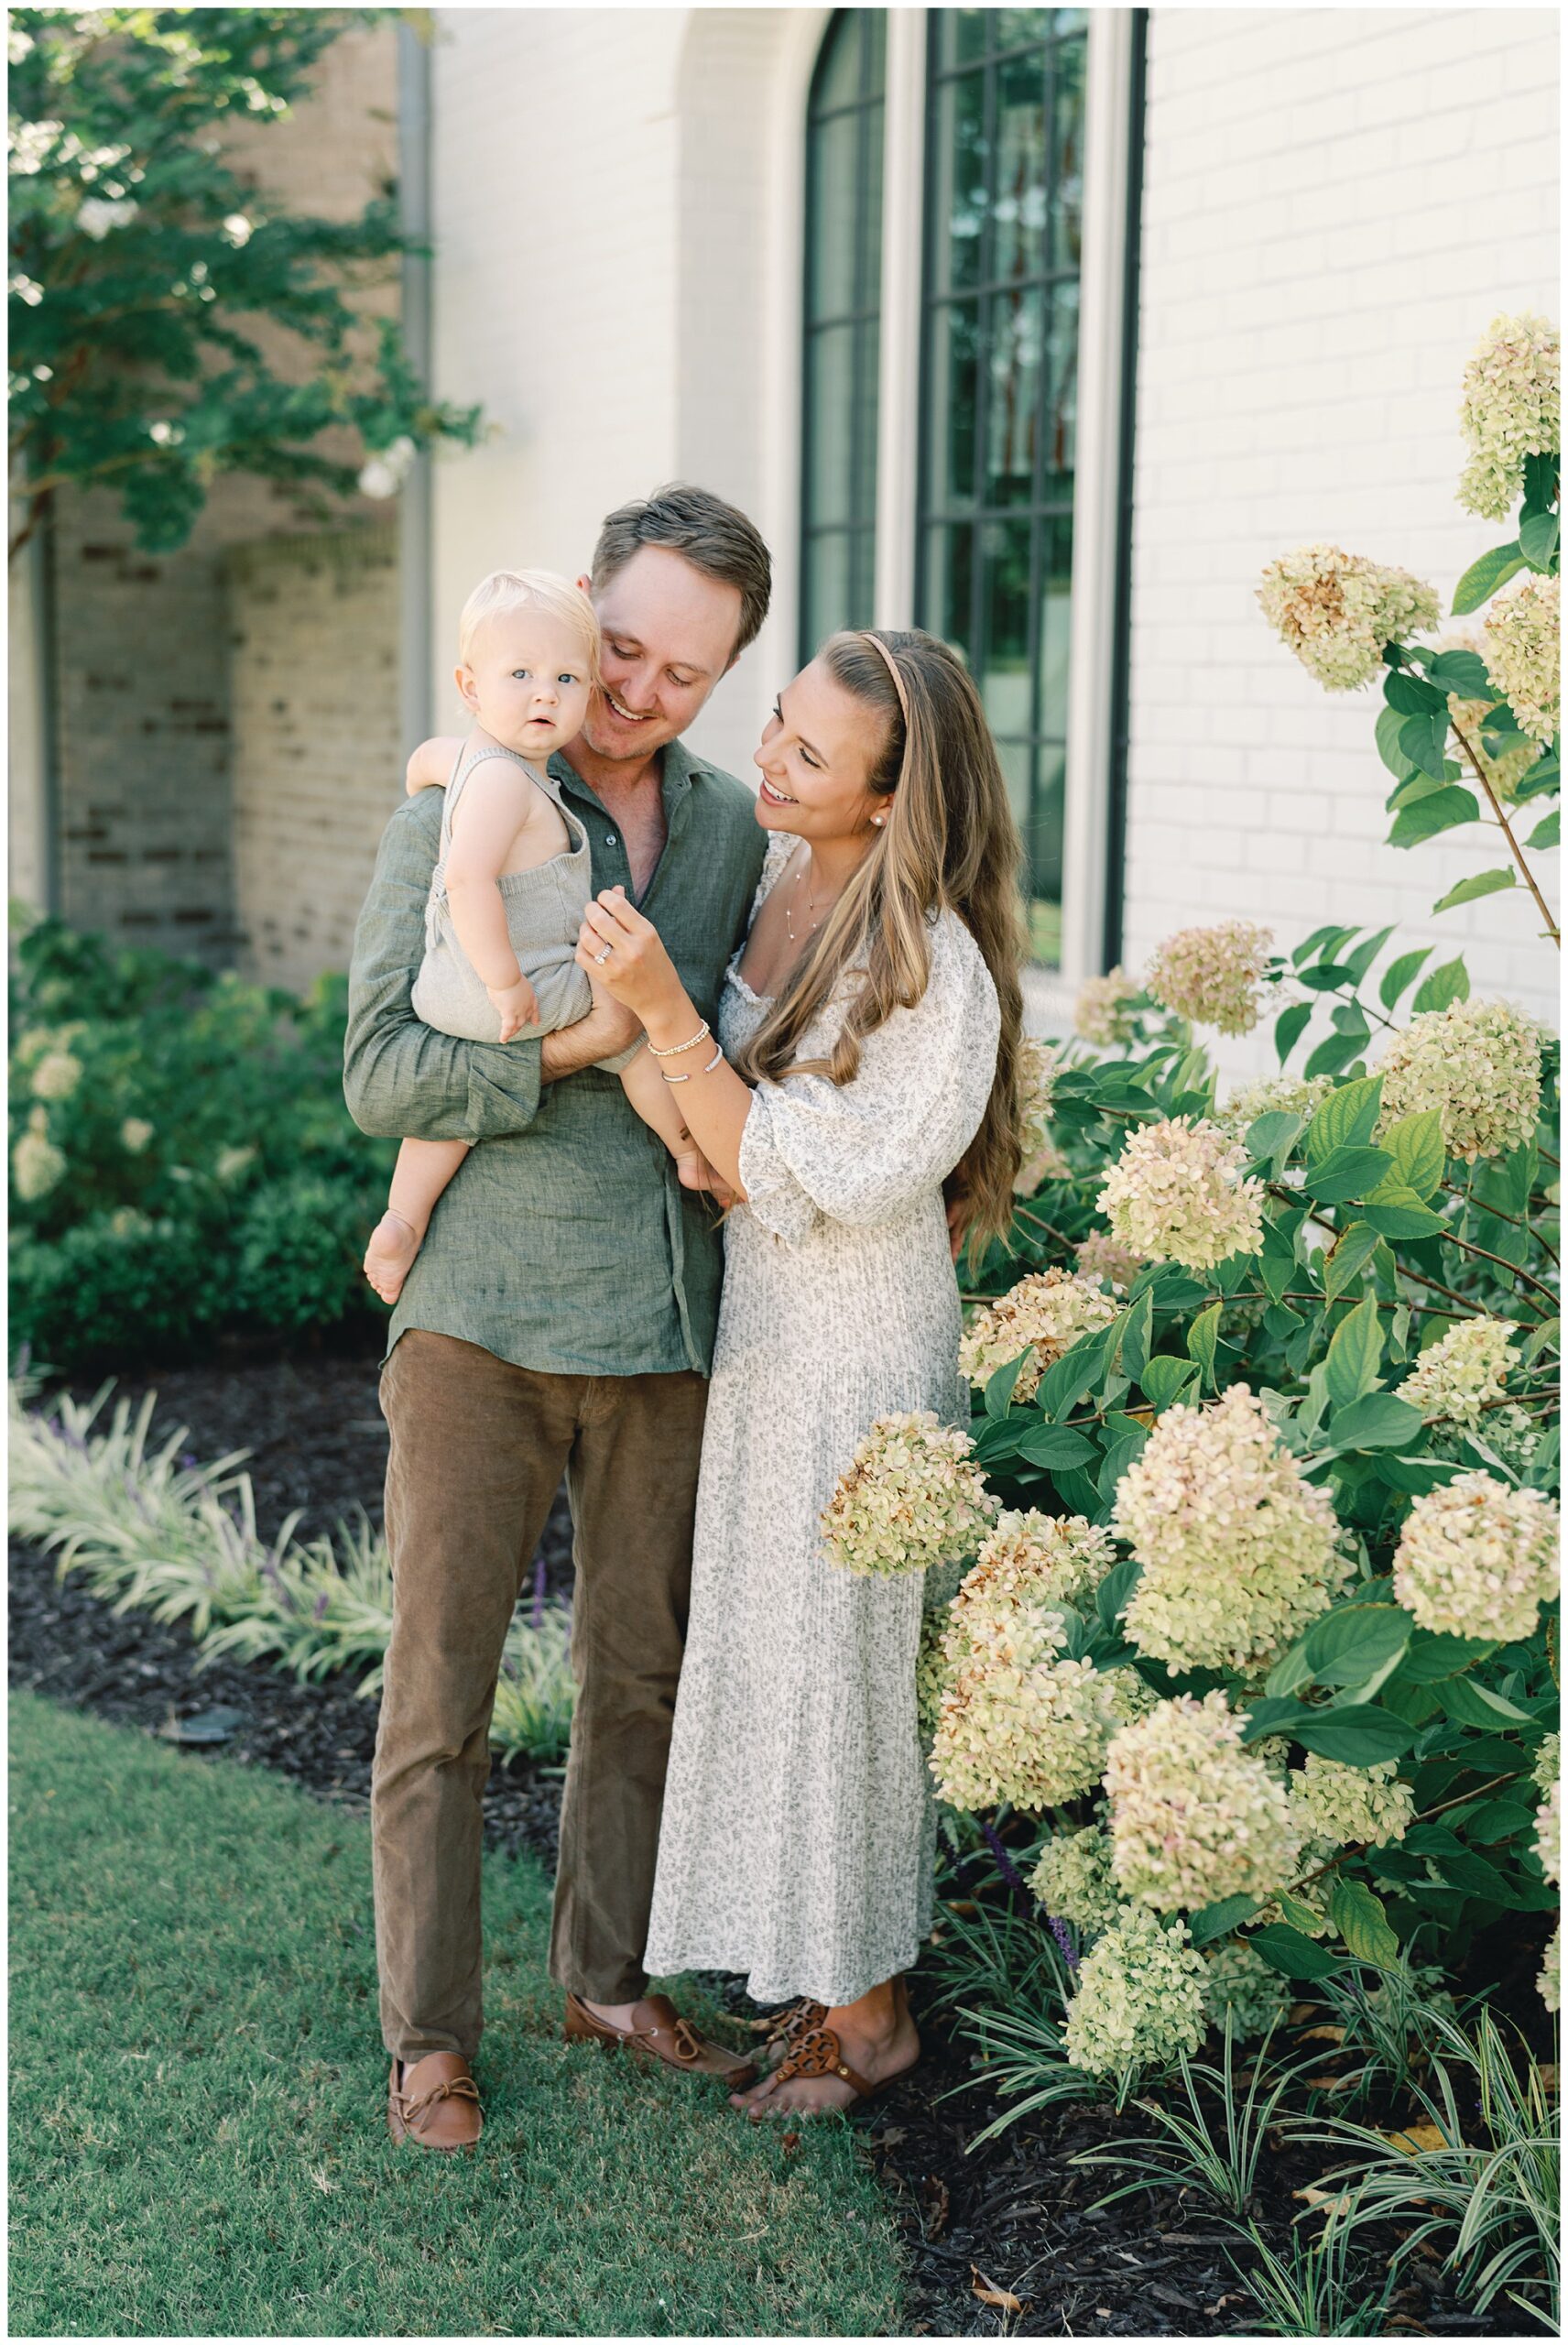 Parents pose smiling at their one year old boy in front of a white brick home with lush green hydrangeas surrounding them for an Alpharetta family photography session.